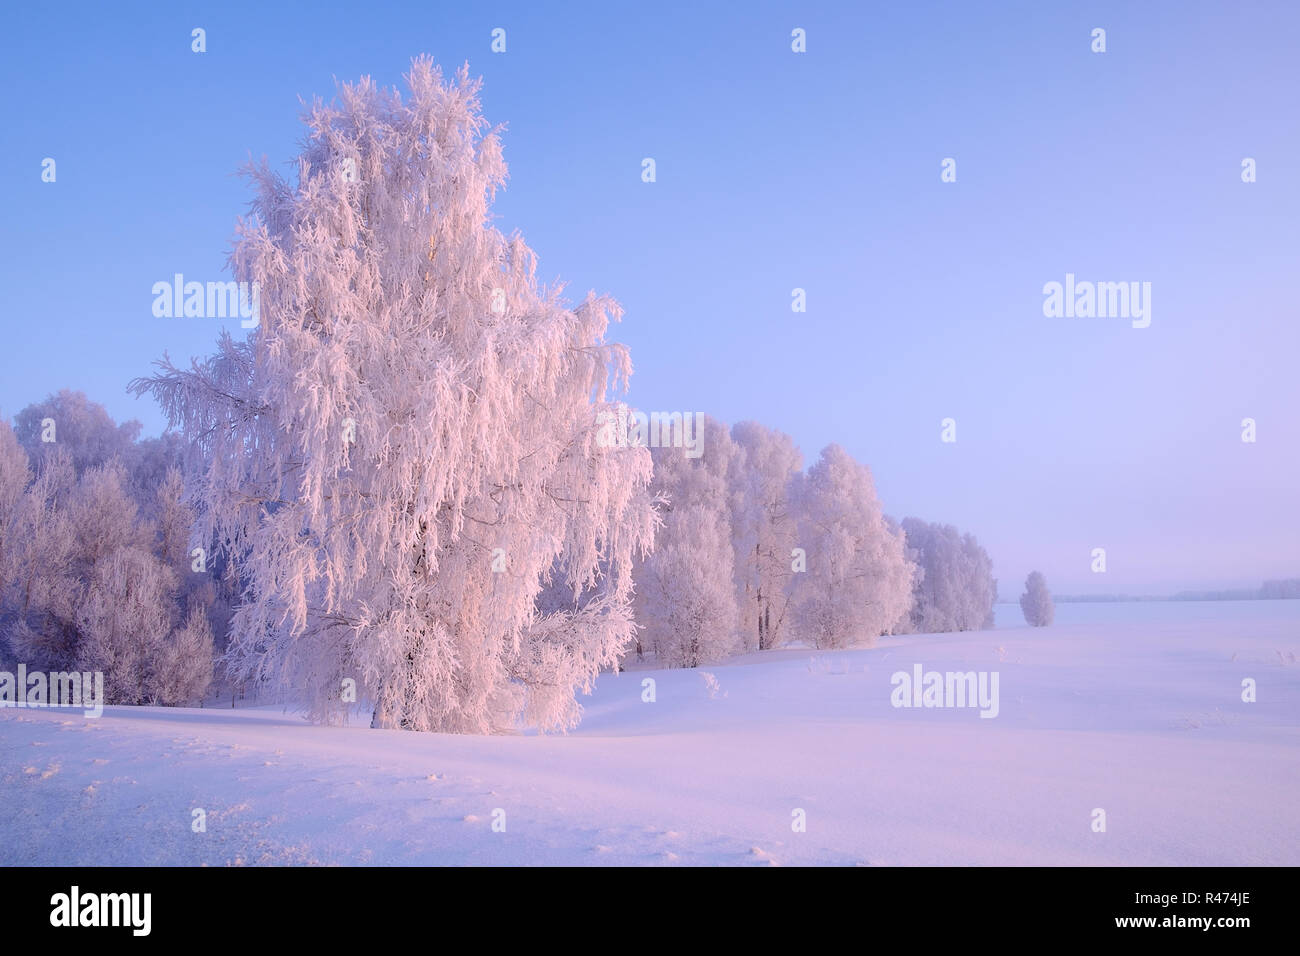 Froozen birch and forest in winter lit by the rising sun. Siberian winter landscape, Altai, Russia Stock Photo